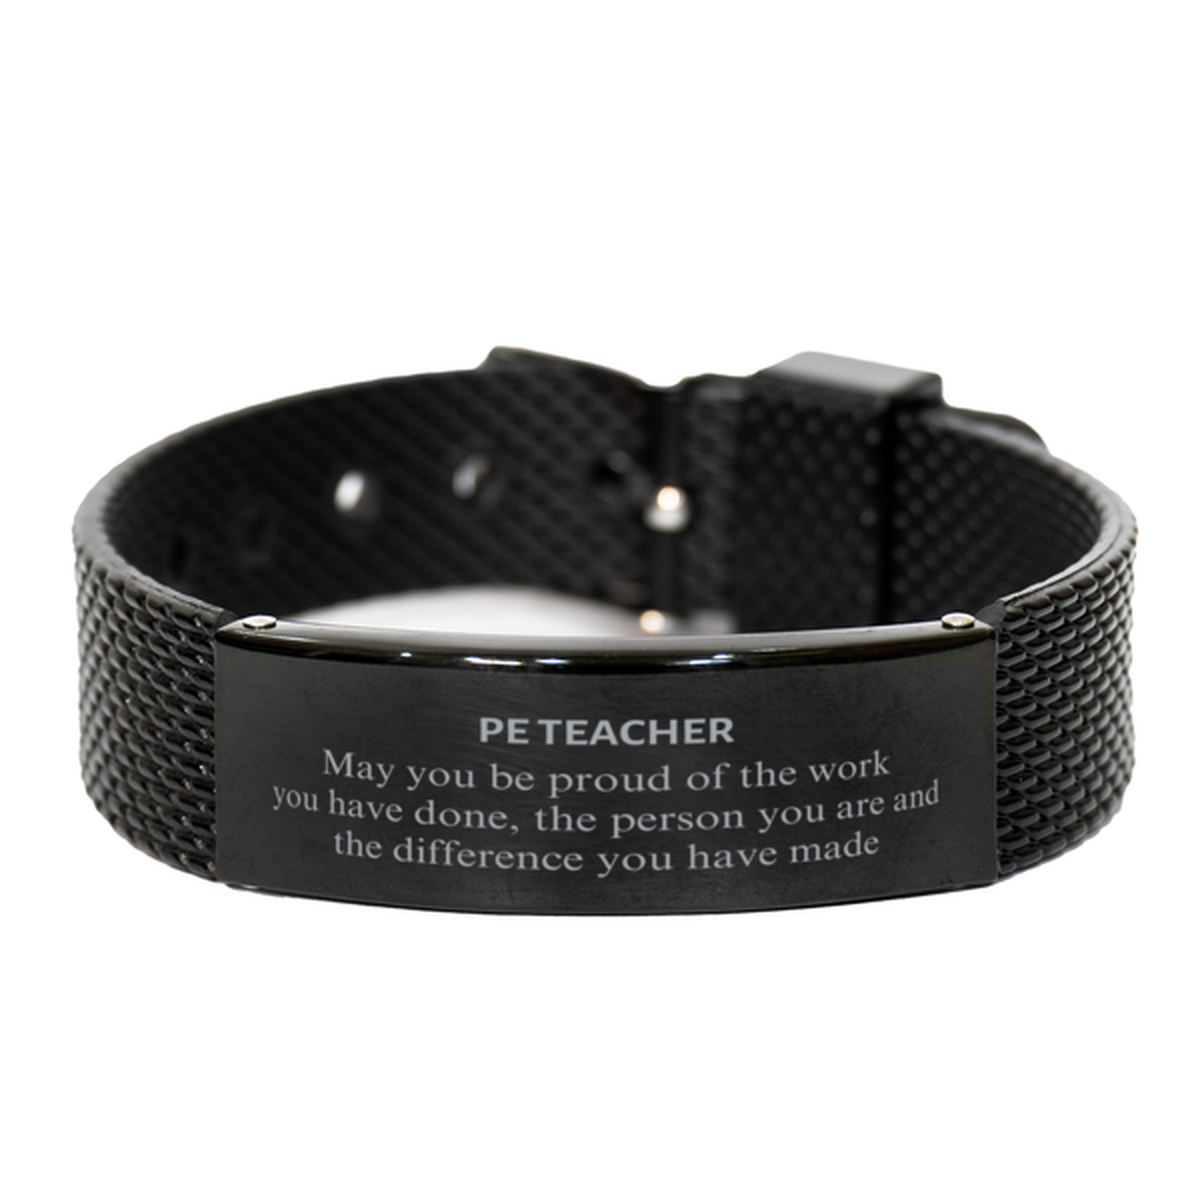 PE Teacher May you be proud of the work you have done, Retirement PE Teacher Black Shark Mesh Bracelet for Colleague Appreciation Gifts Amazing for PE Teacher